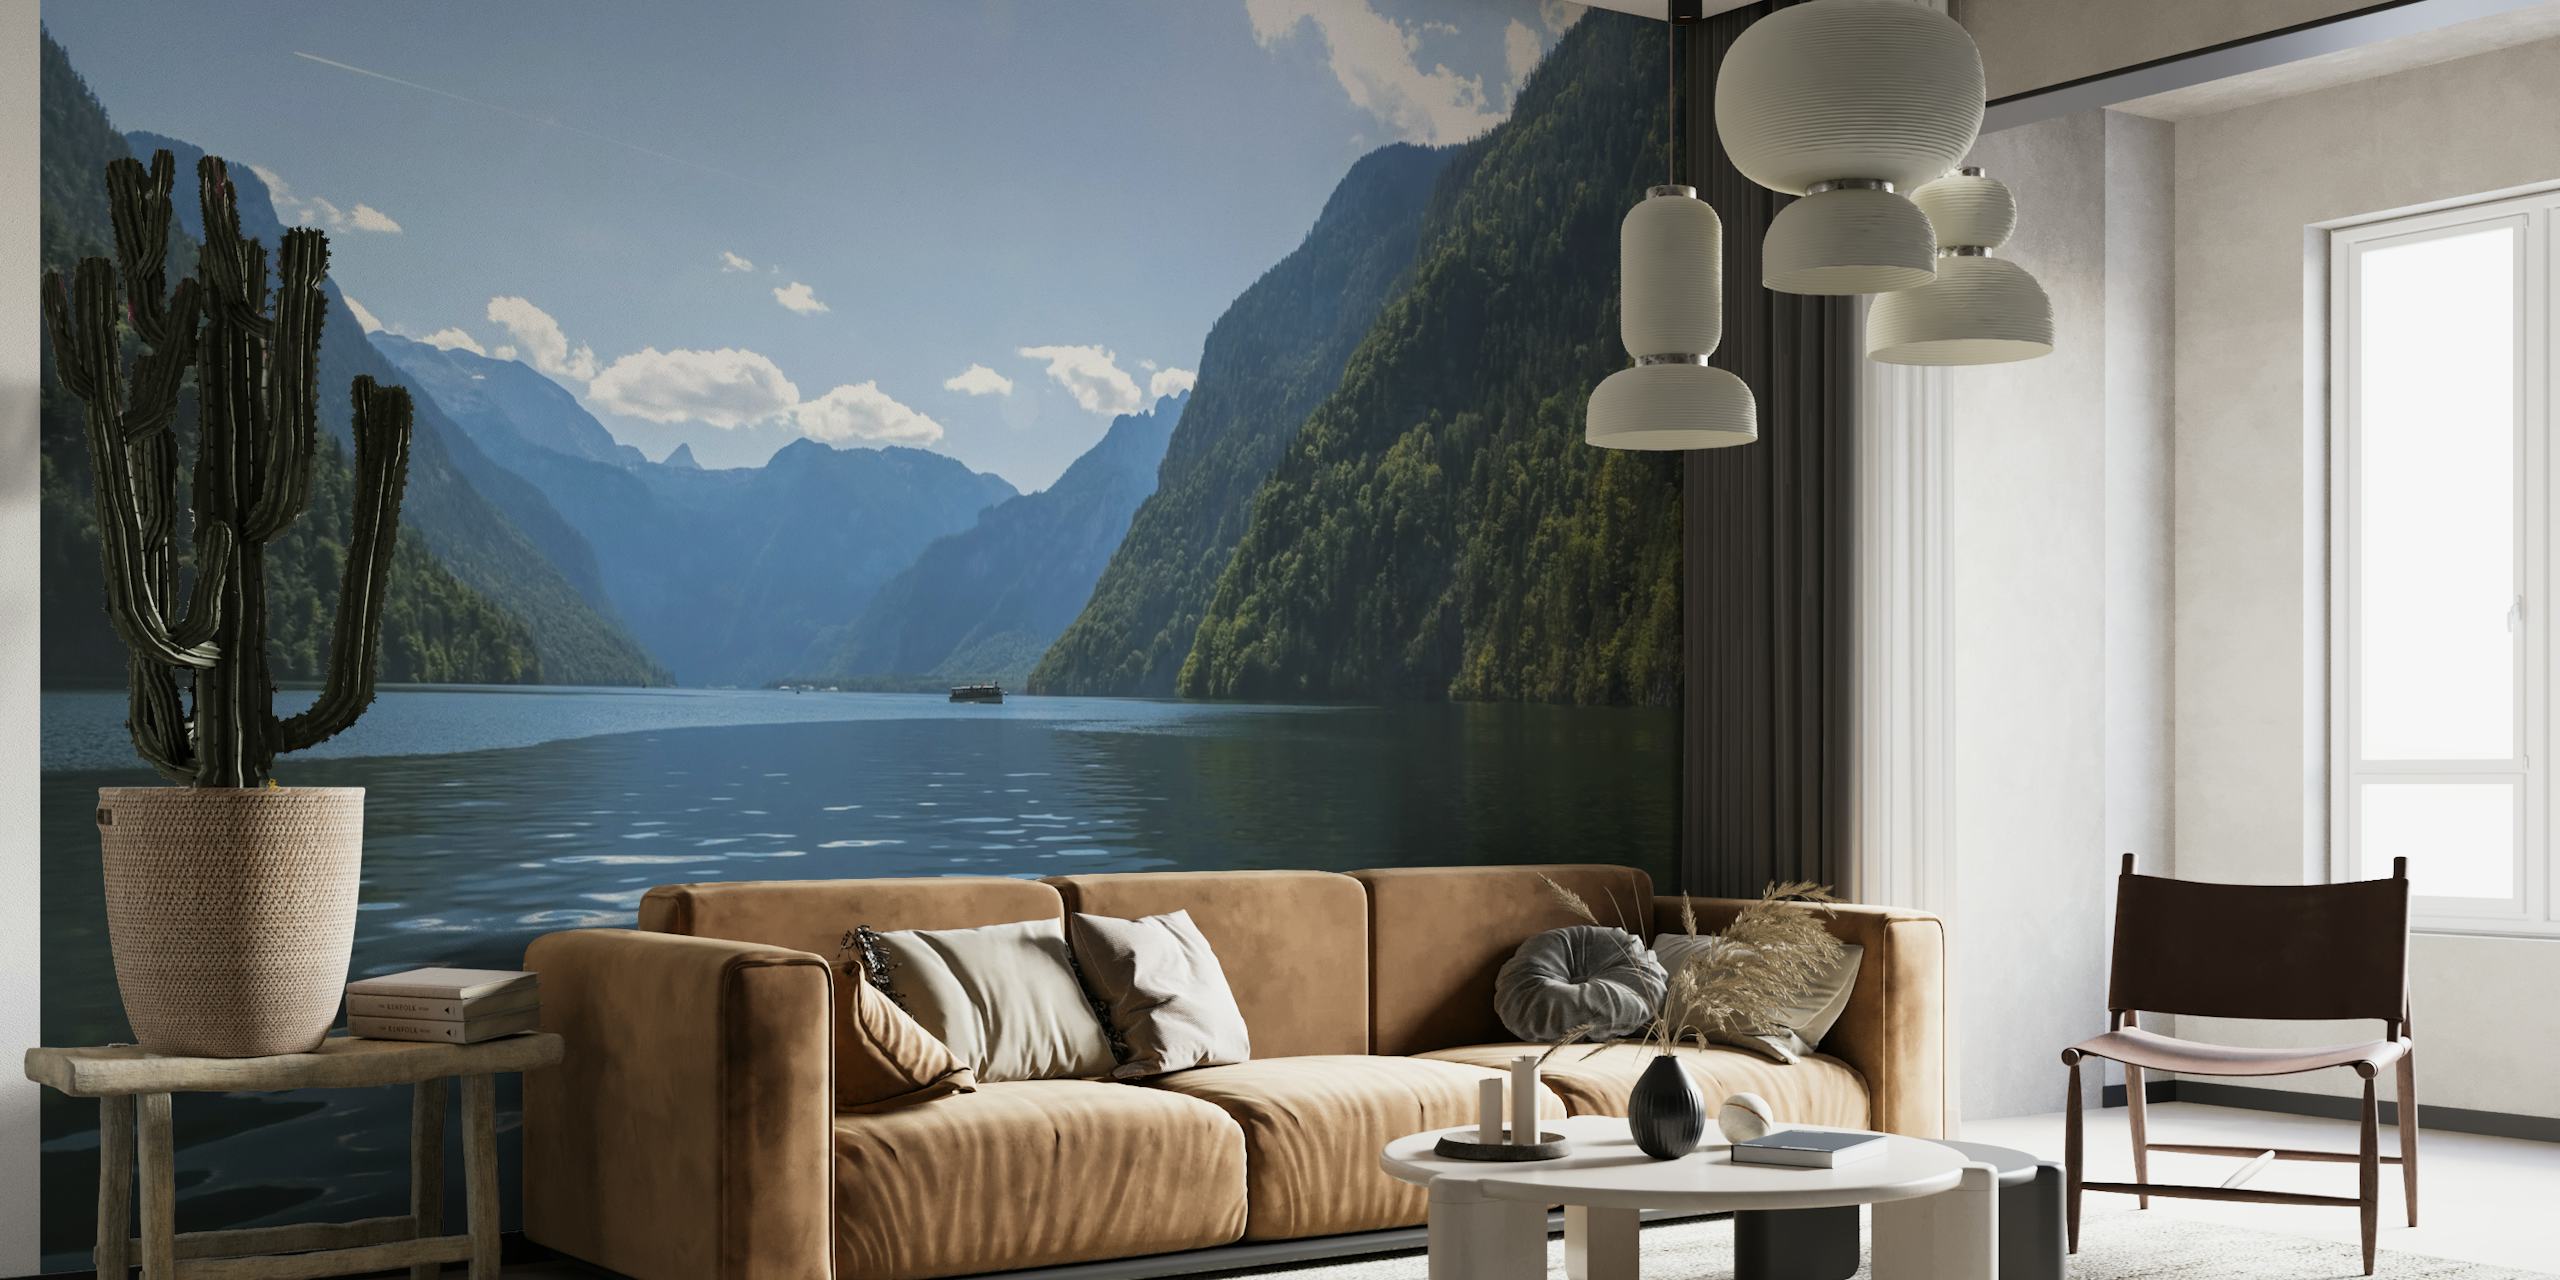 Tranquil lake view with mountains wall mural